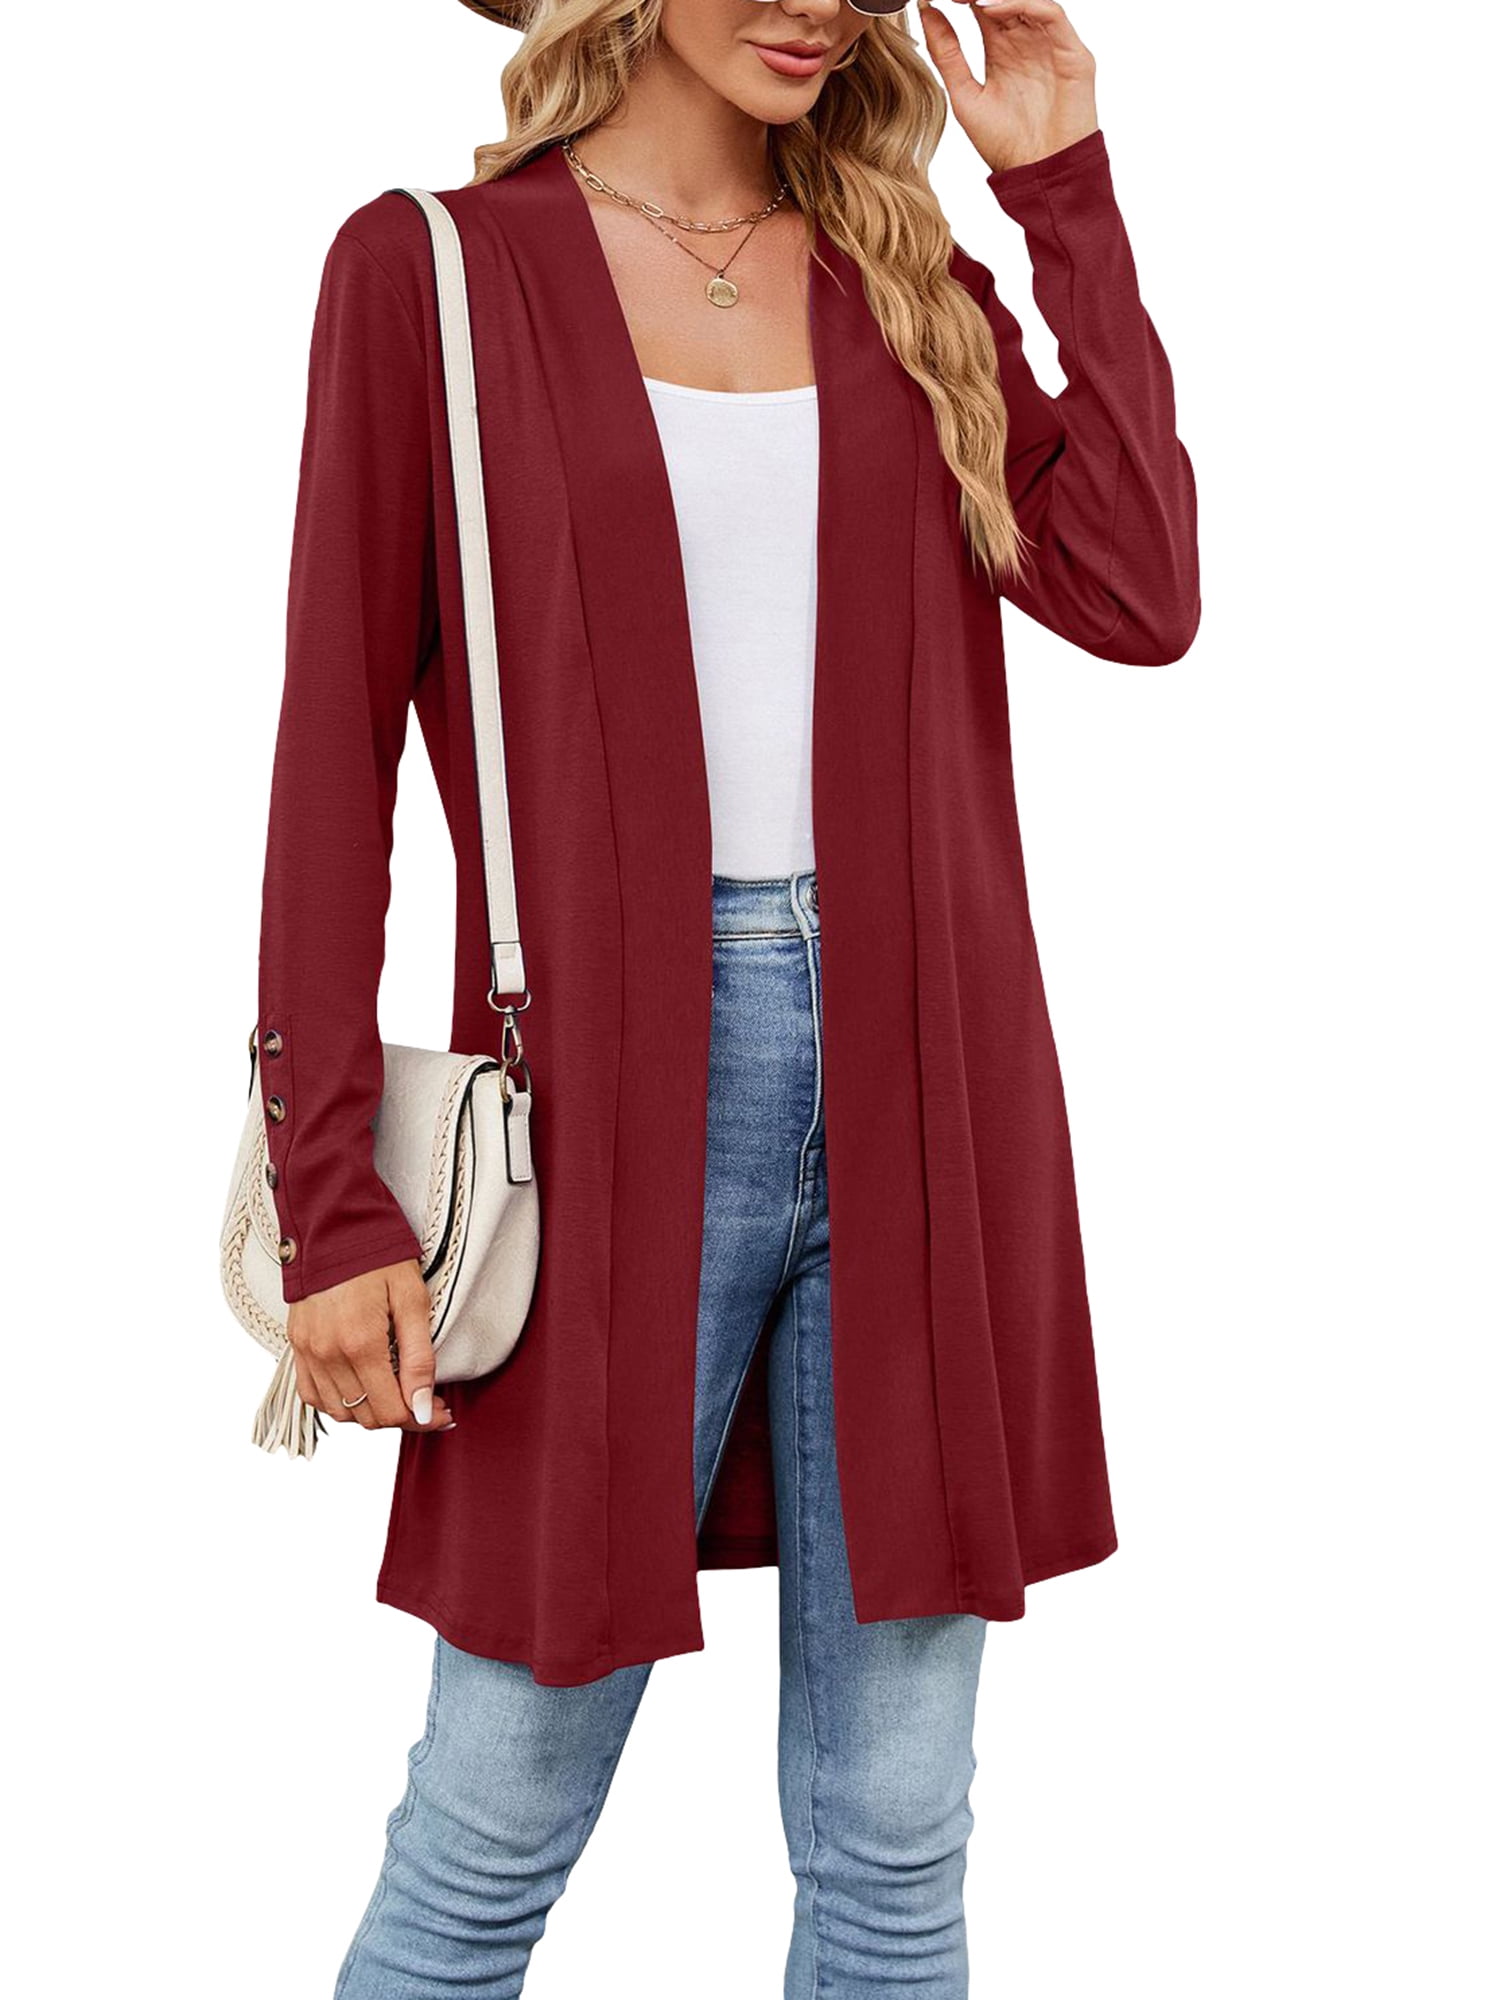 Pudcoco Women Long Cardigan Solid Color Long Sleeve Open Front Cardigan ...